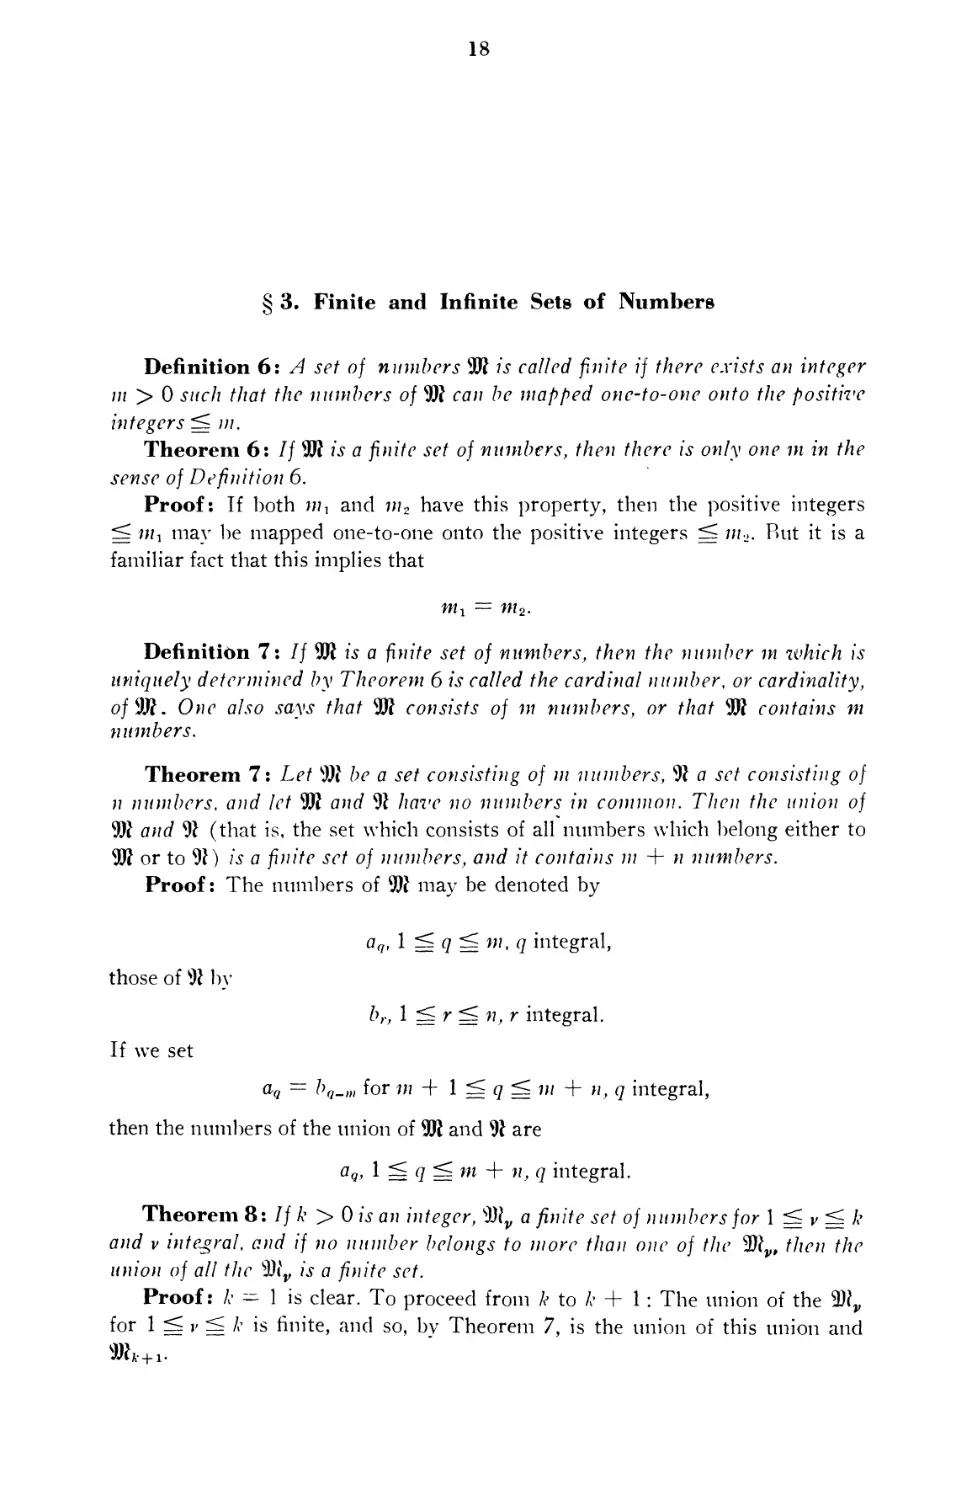 § 3. Finite and Infinite Sets of Numbers